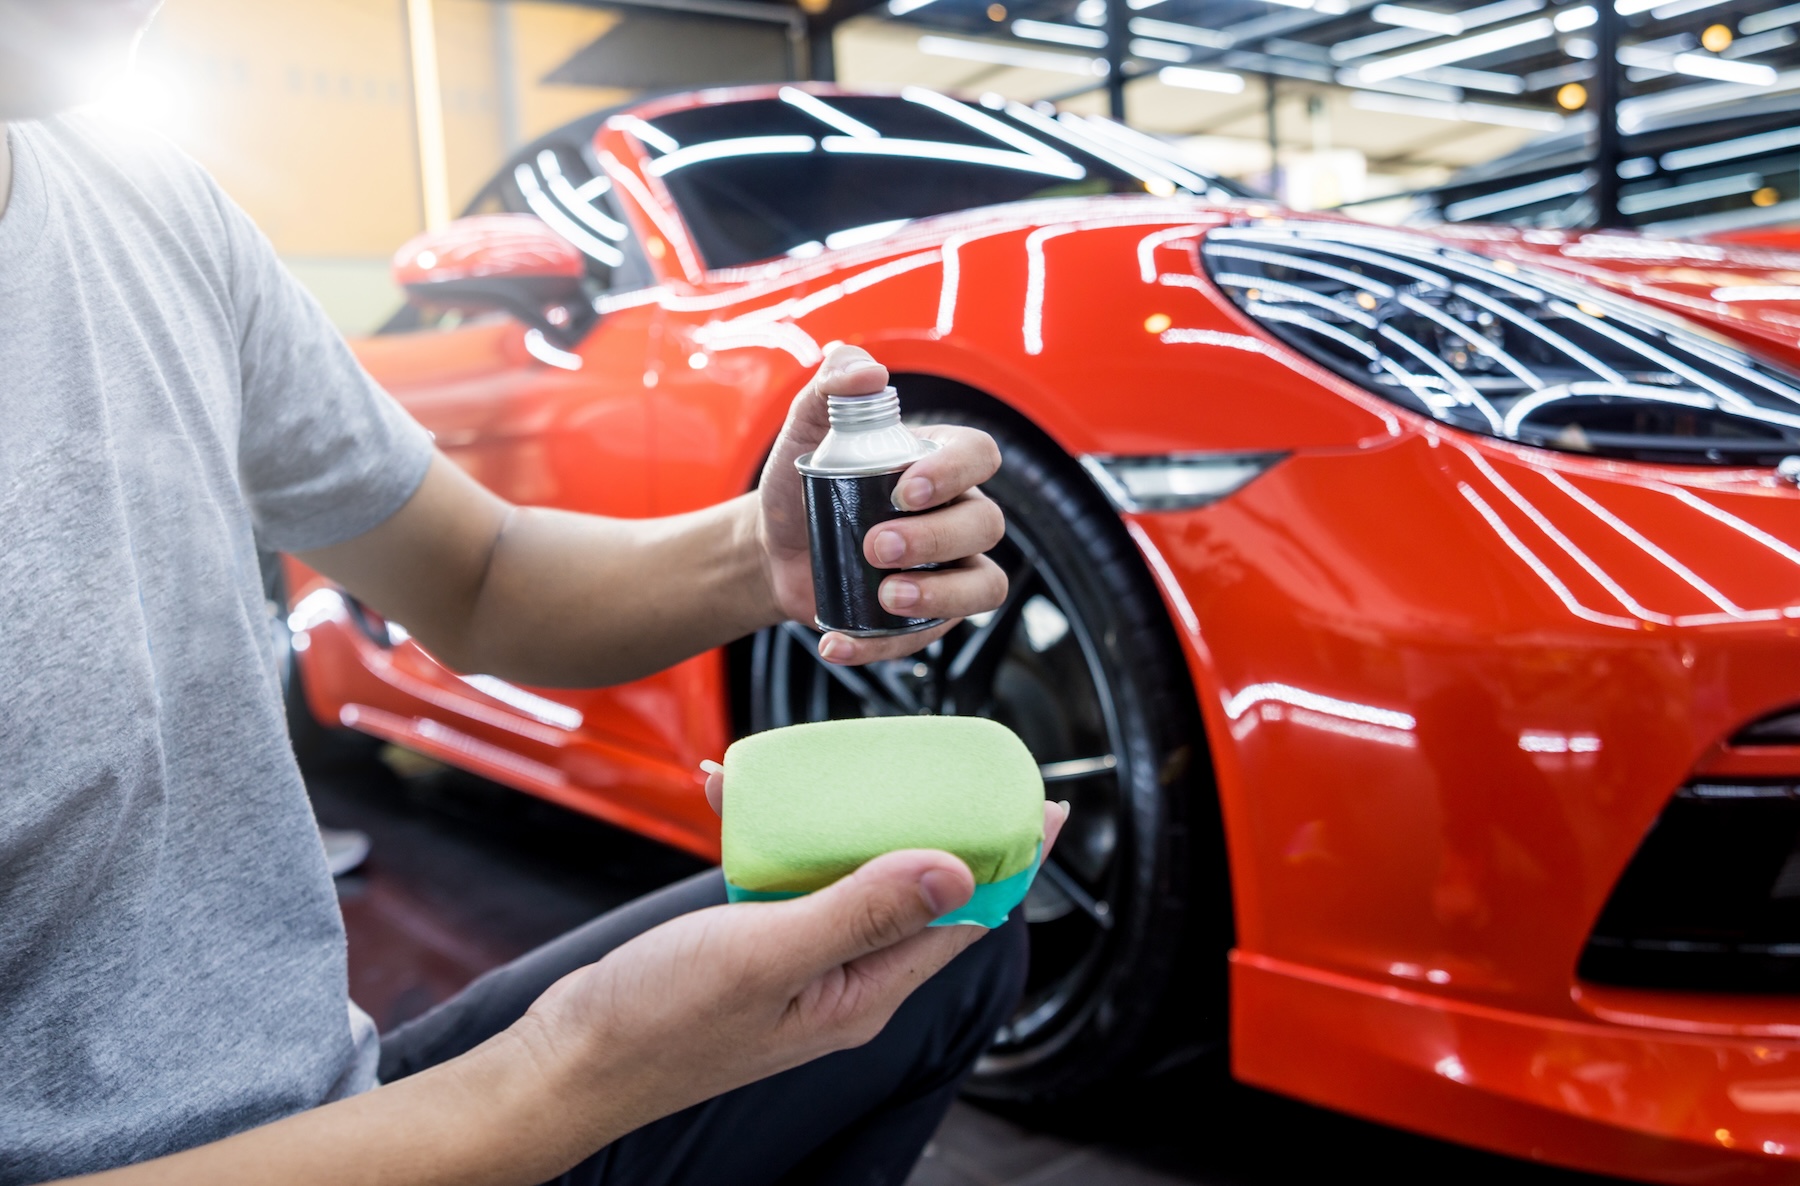 5 Best Ceramic Car Waxes for Car Enthusiasts in 2022